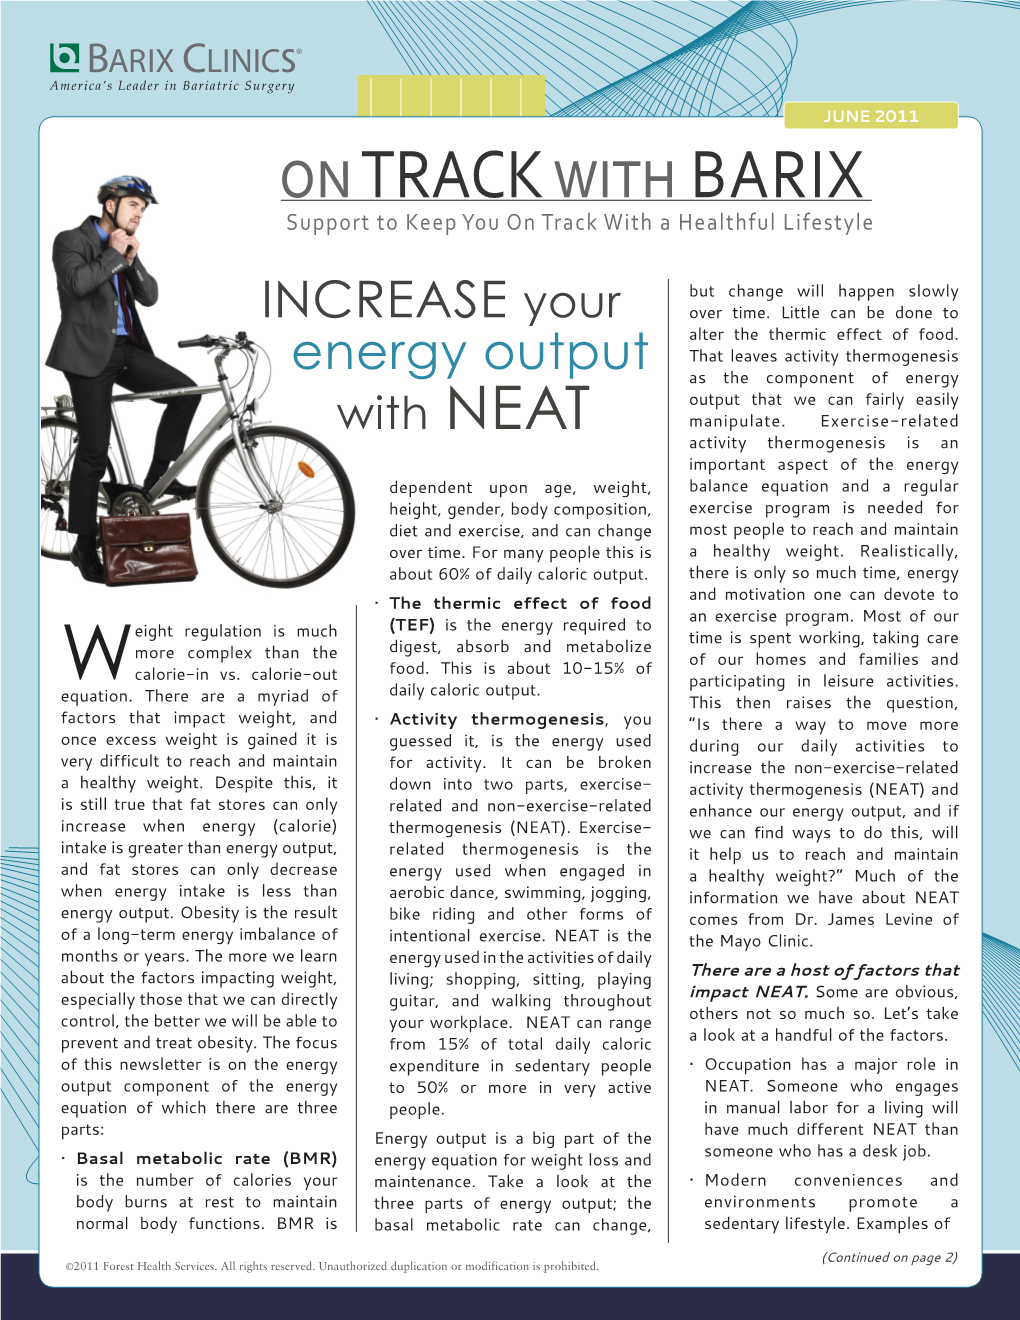 Ontrack with BARIX